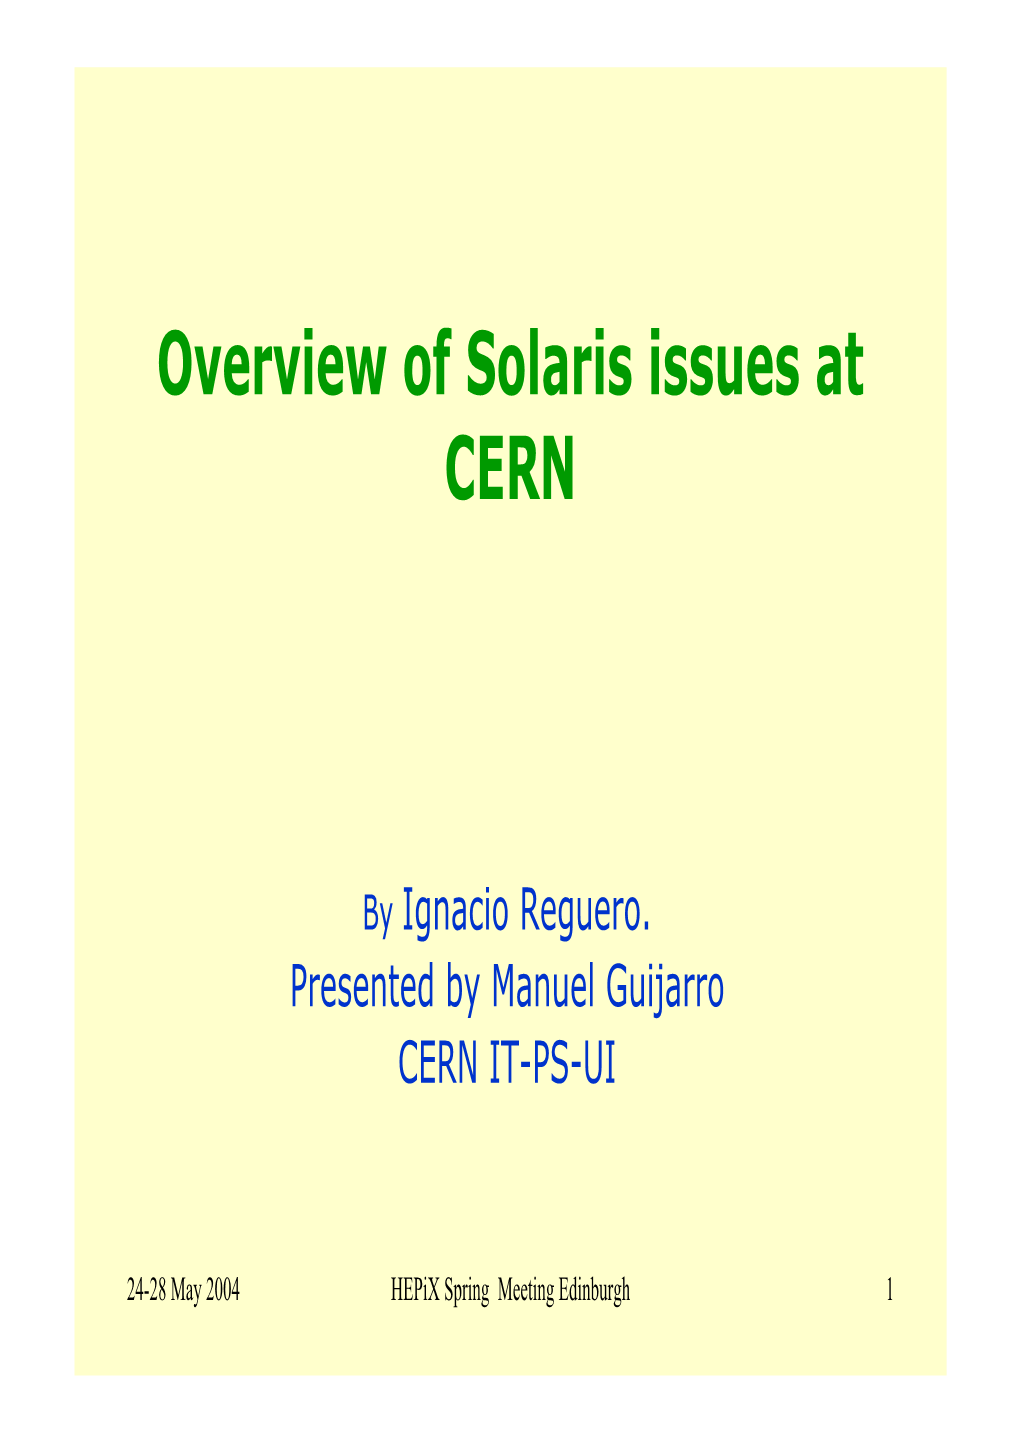 Overview of Solaris Issues at CERN